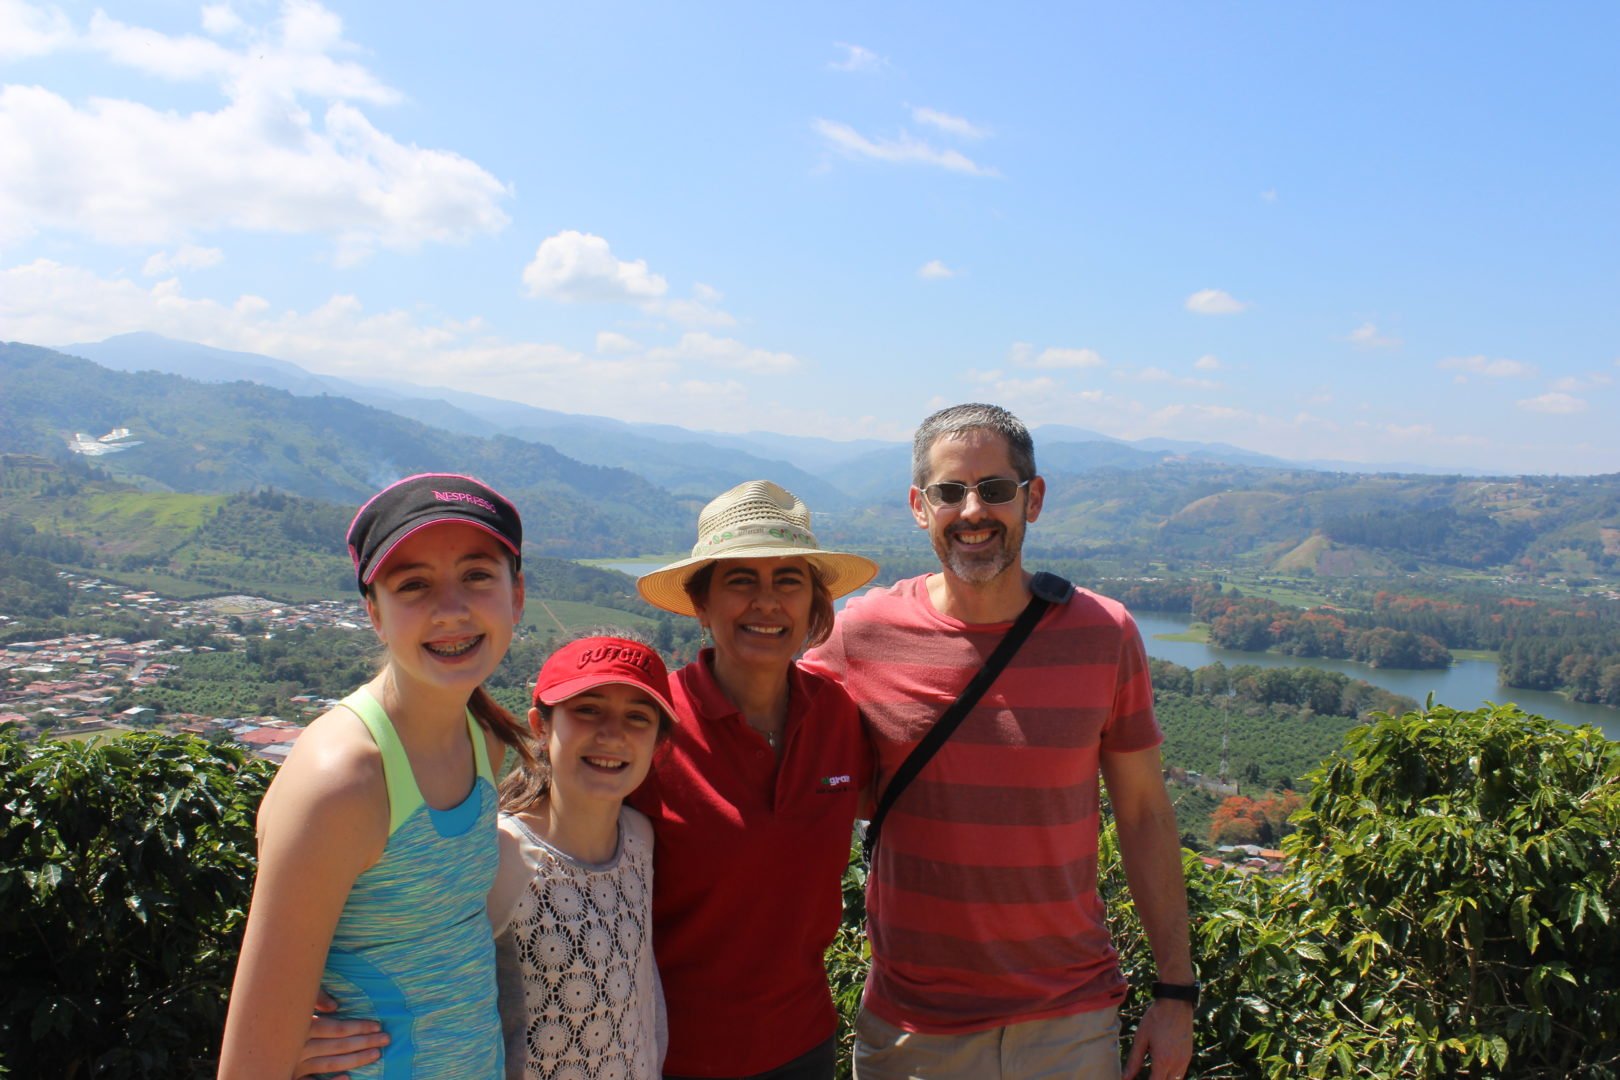 Cecilia, coffee farmer and recycling centre founder, and mentee in the Mentoring Women in Business programme poses with her mentor Paul and his family